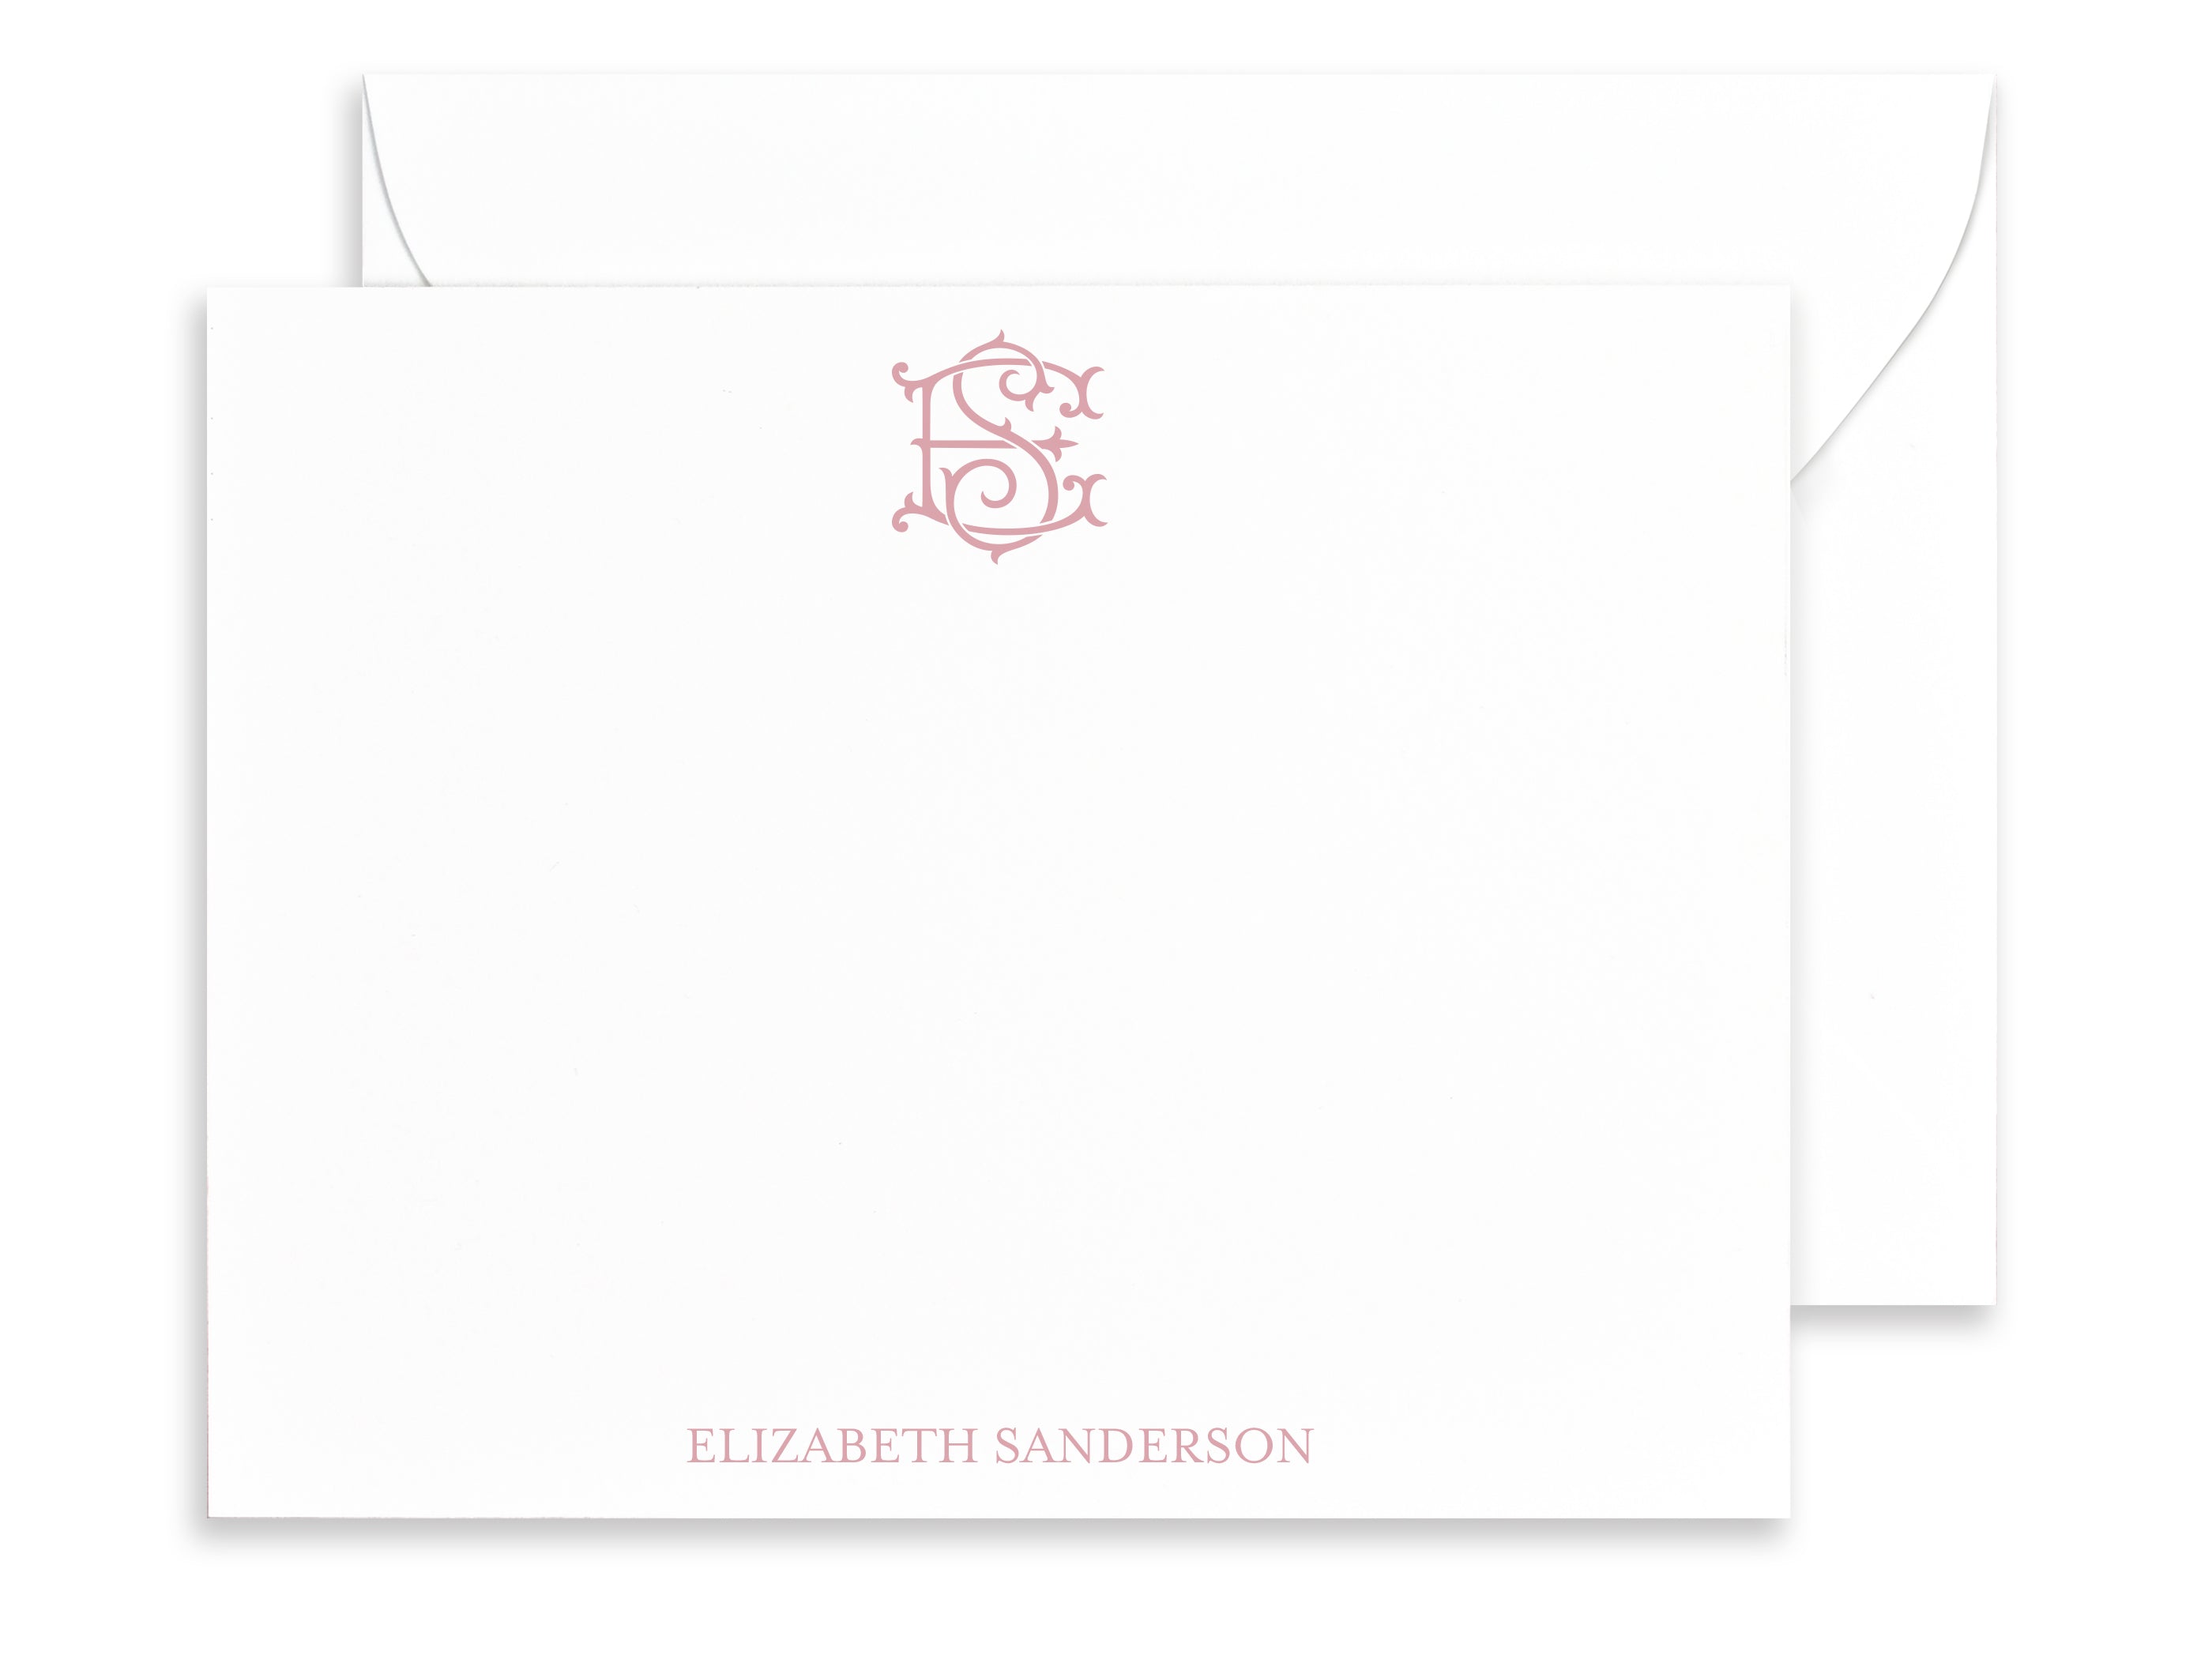 Personalized Monogram Stationery, Initial Note Card Sets - Augusta Joy